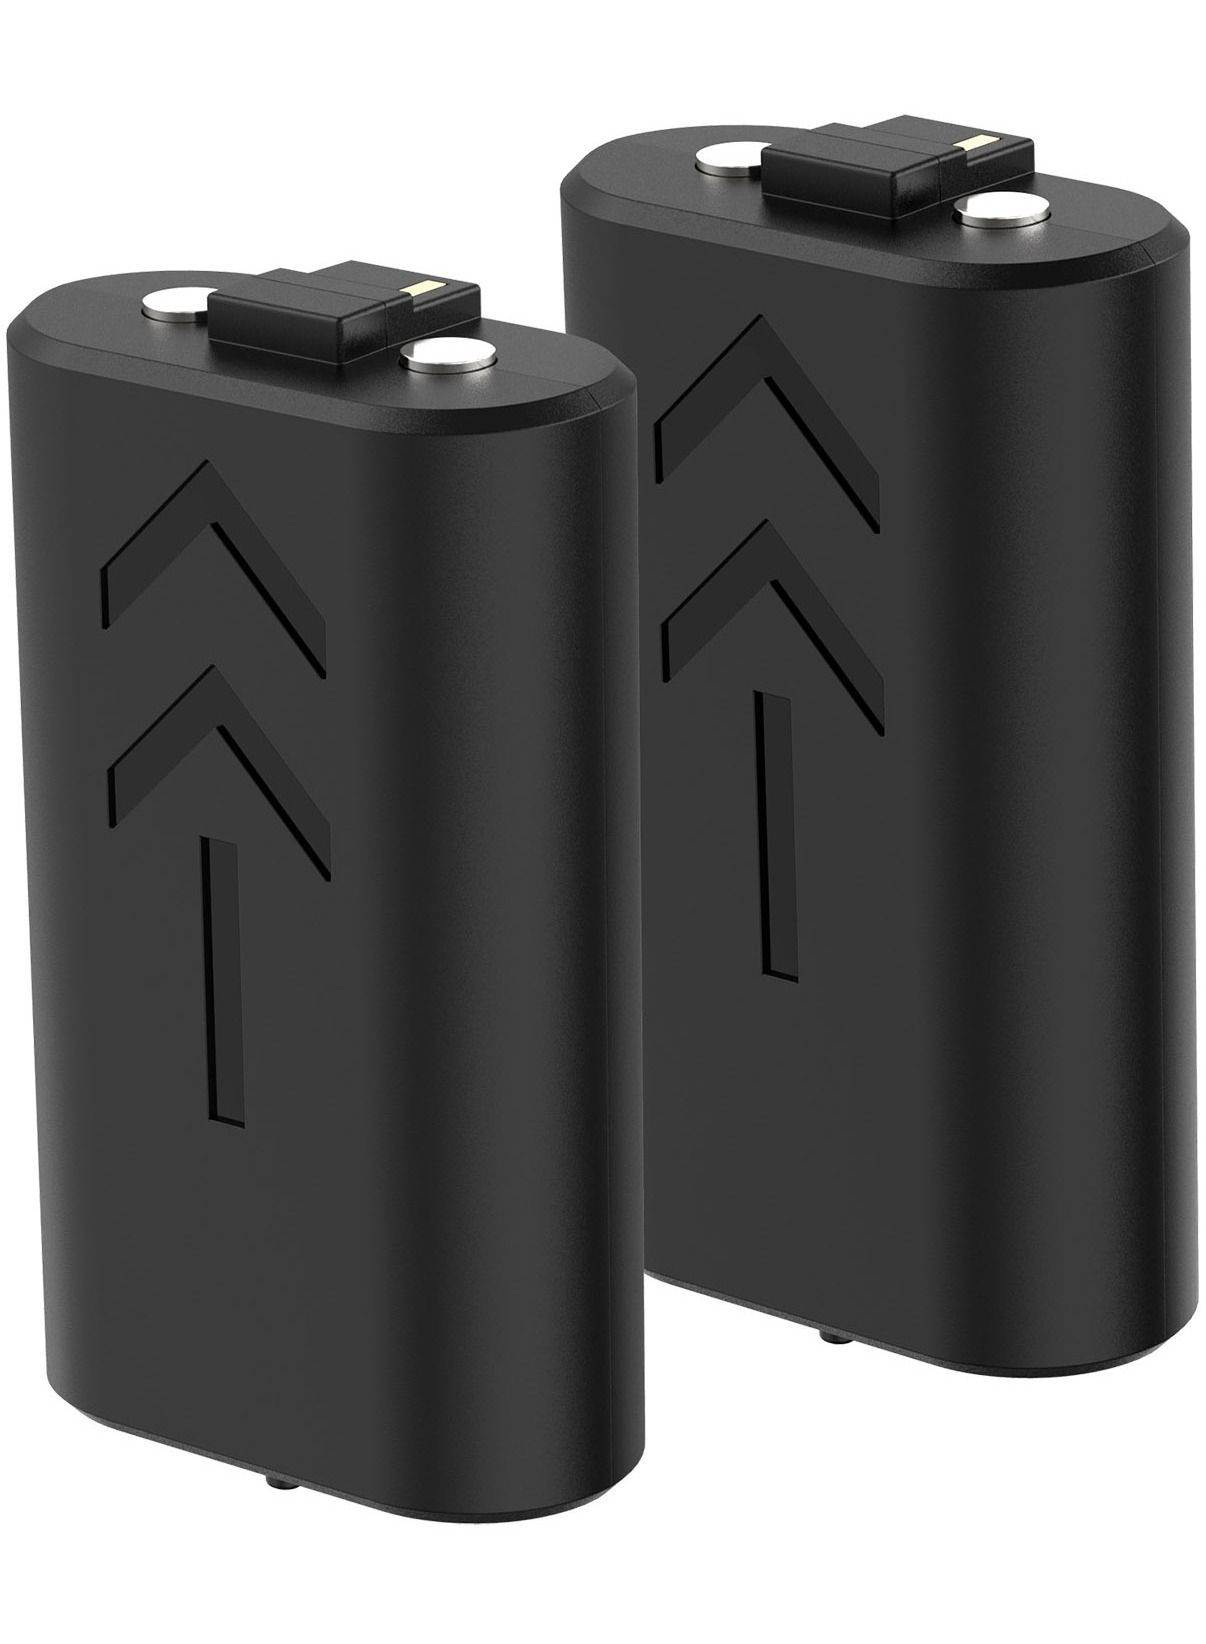 Rechargeable Controller Battery Pack [2-PACK] with [1200 mAh HIGH POWER capacity] for Xbox Series X and Series S (also compatible with Xbox Series One X/S) - Black 